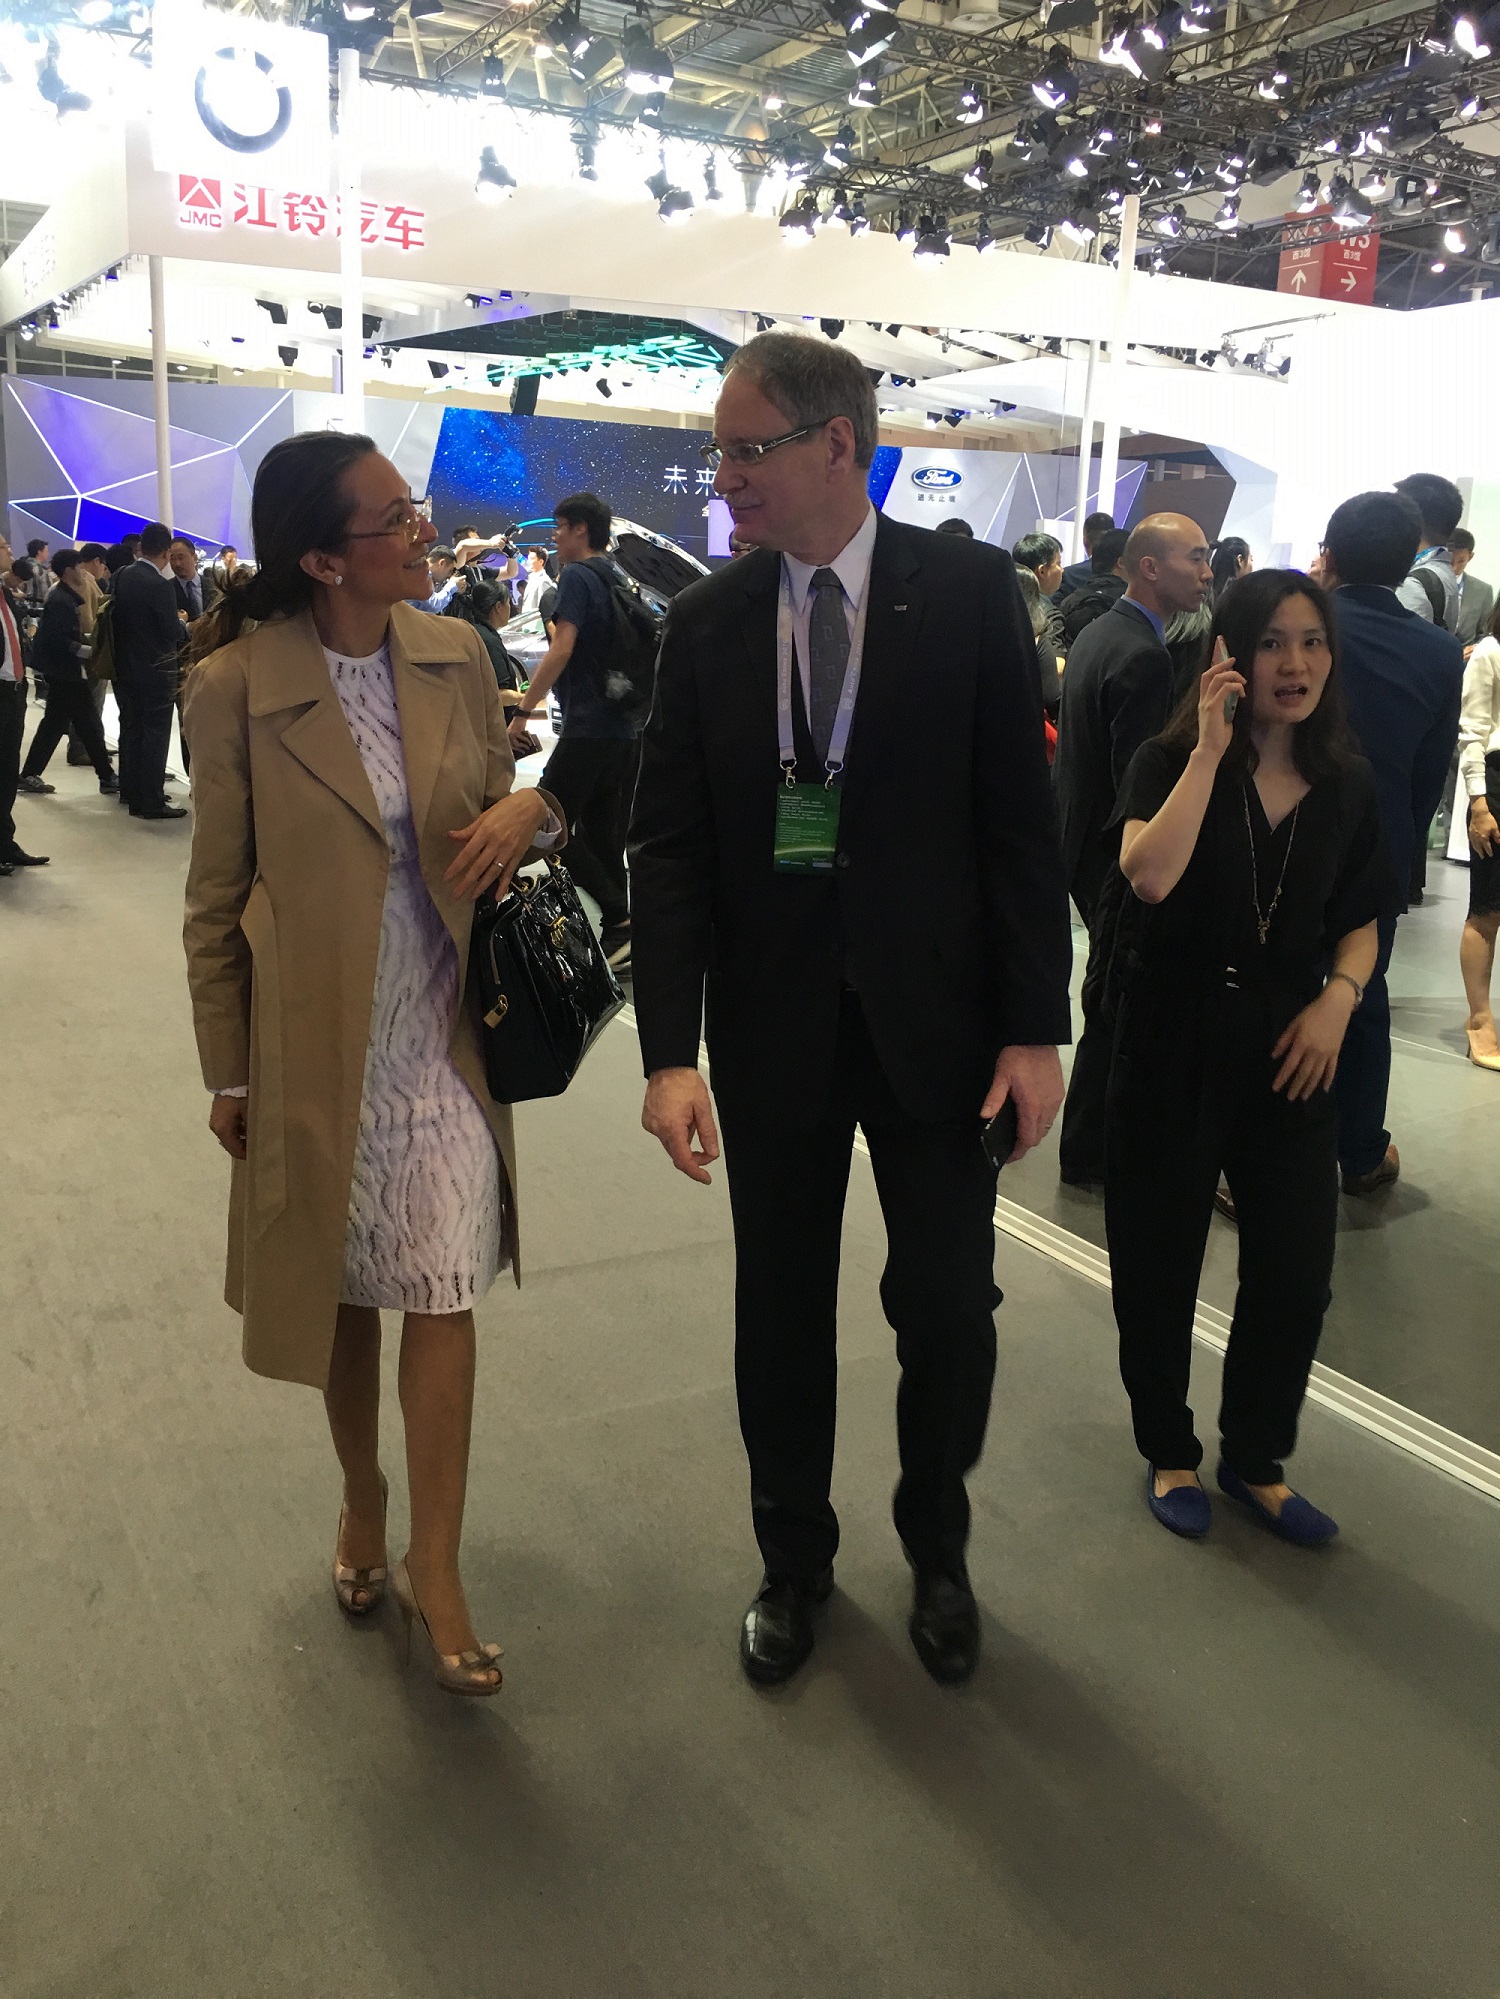 LIASE Group Managing Director Asia Vanessa Moriel chats with Johan De Nysschen, Executive Vice President, General Motors, and President of Cadillac.